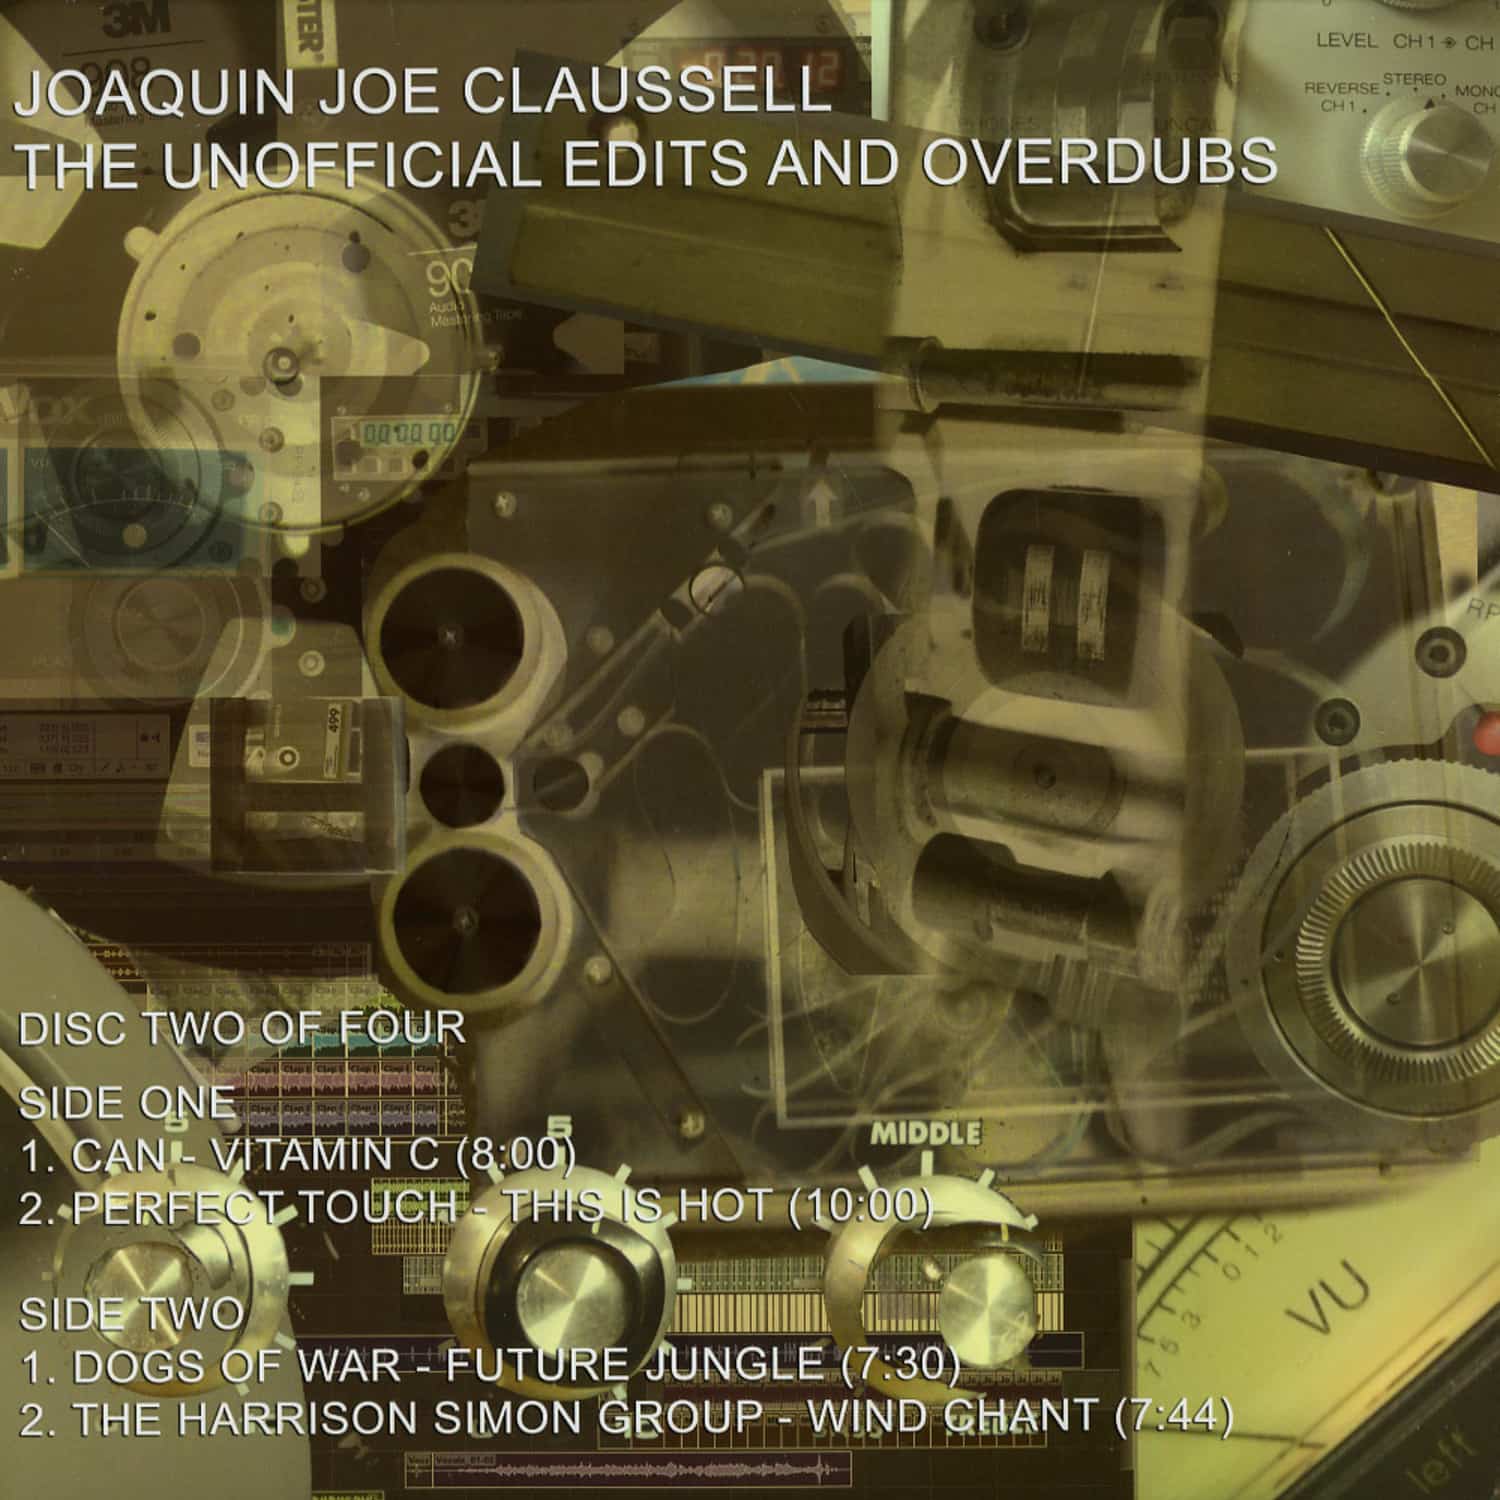 Joaquin Joe Claussell - THE UNOFFICIAL EDITS AND OVERDUBS PART 2